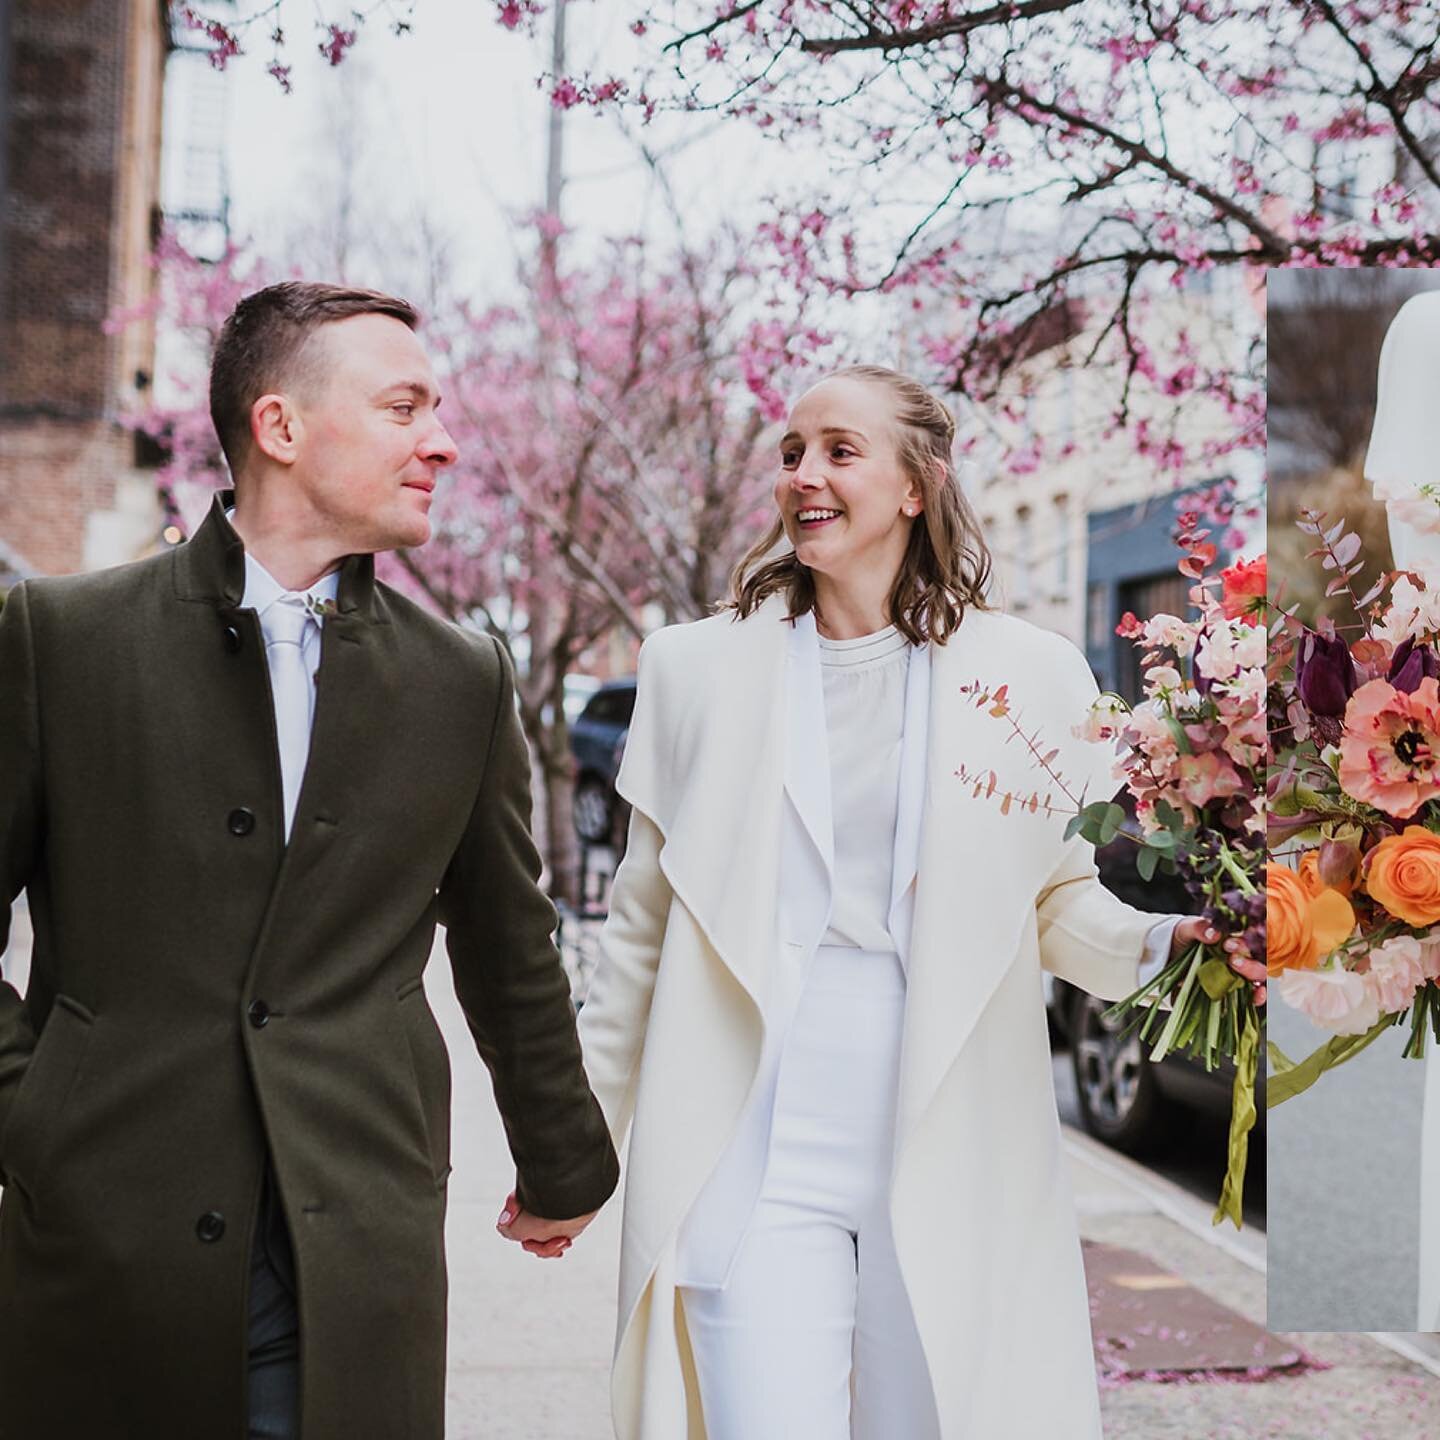 These two tied the knot on an early spring day along the Brooklyn waterfront with their families and besties to witness. Such a sweet and heartfelt ceremony.
Flowers: @foxfodderfarm 
Officiant: @honeybreakofficiants